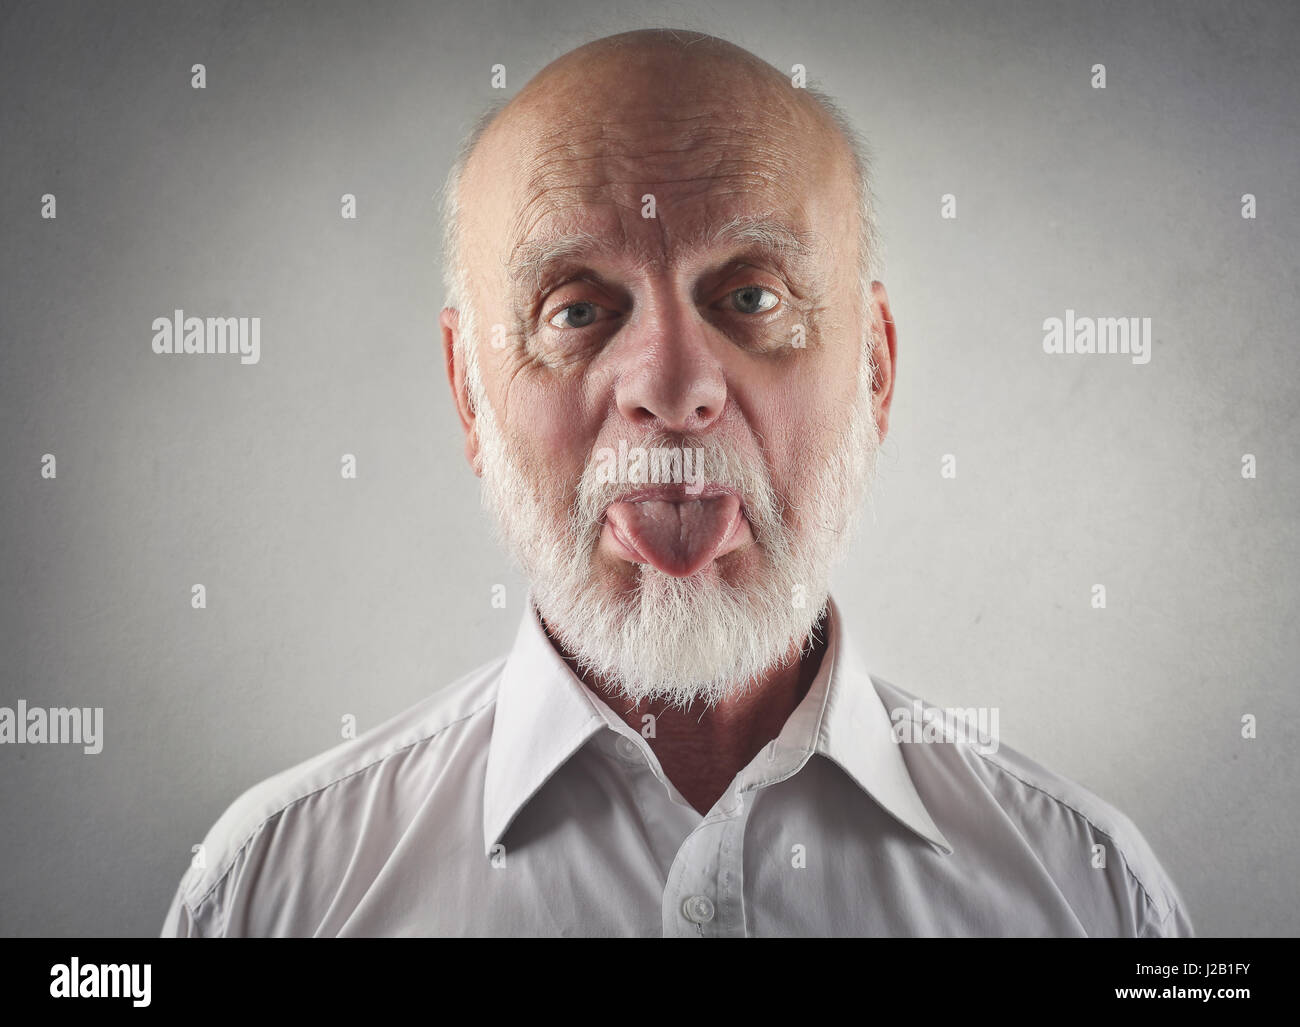 Old man sticking his tongue out Stock Photo